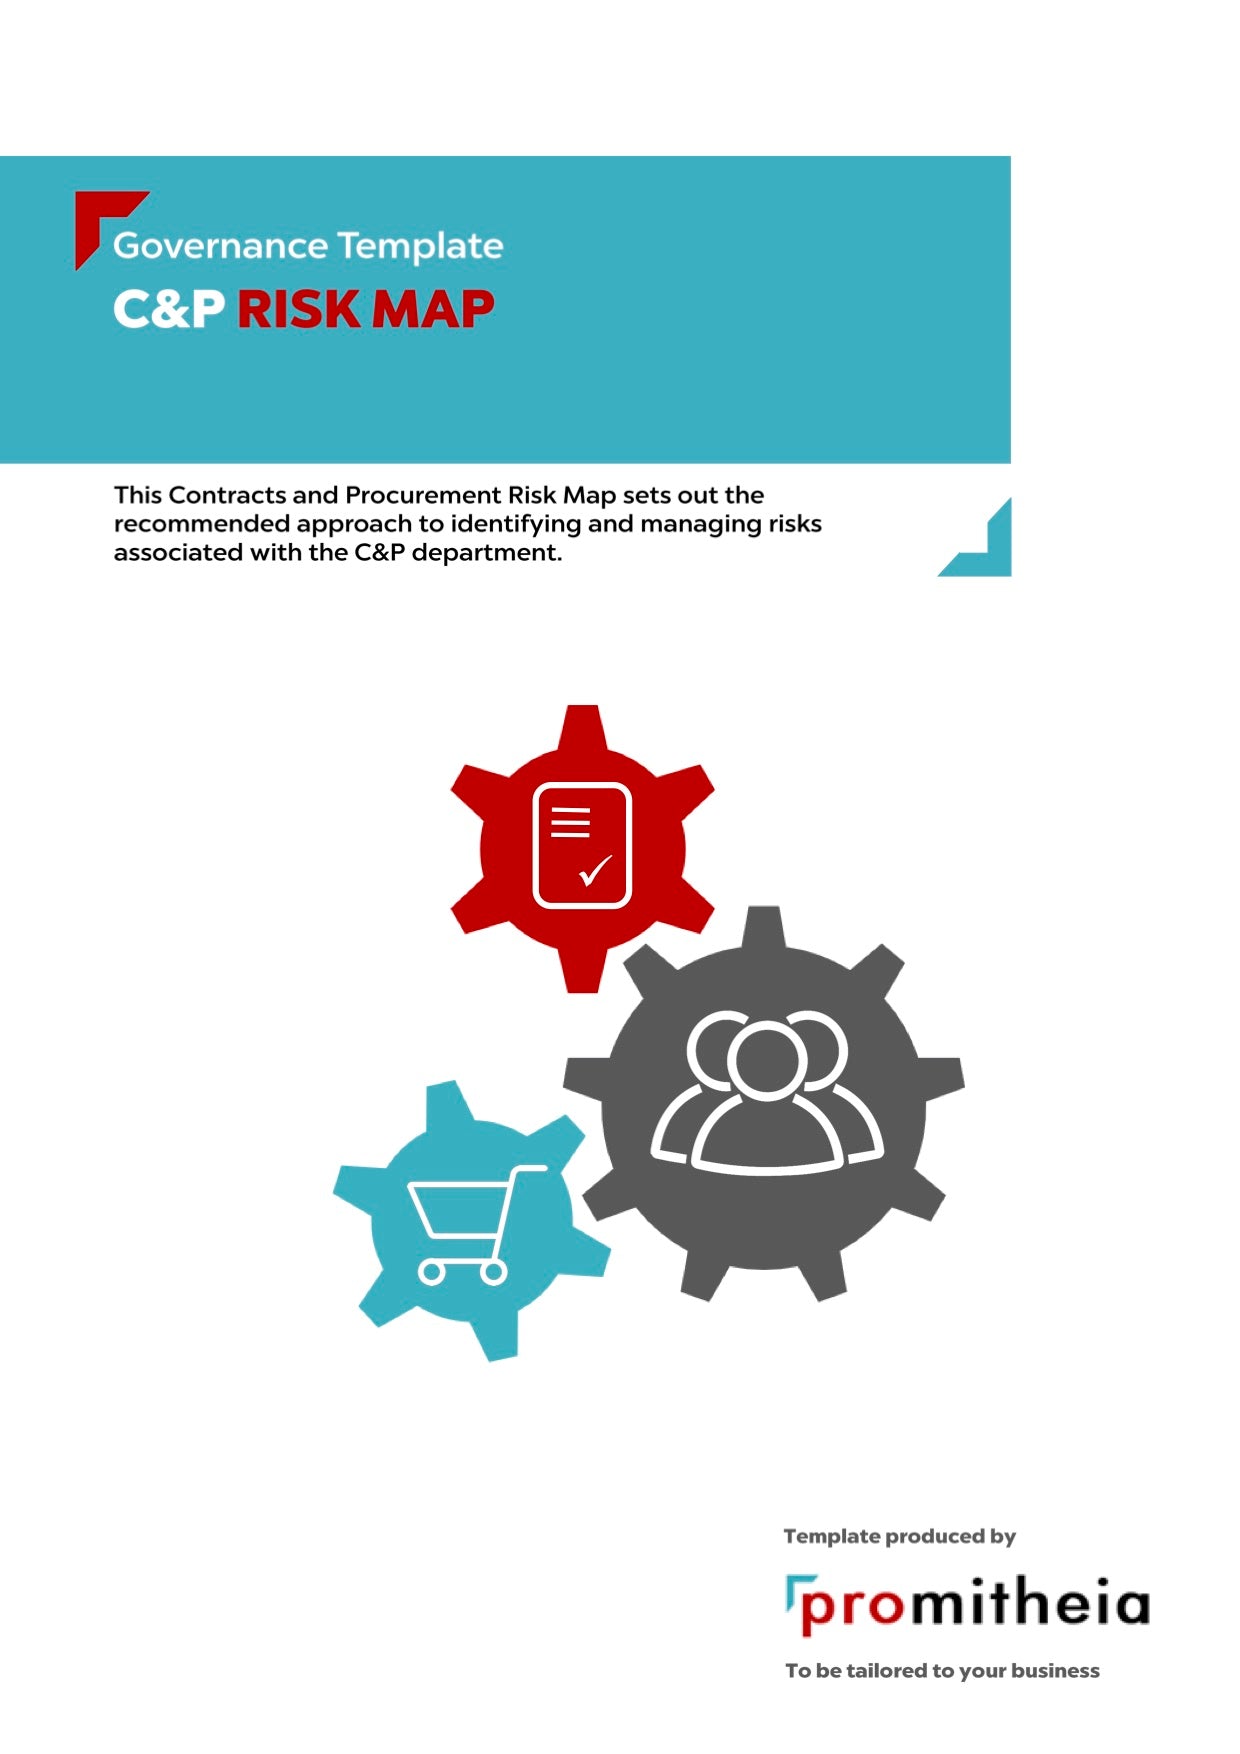 Contracts and Procurement (C&P) Risk Map